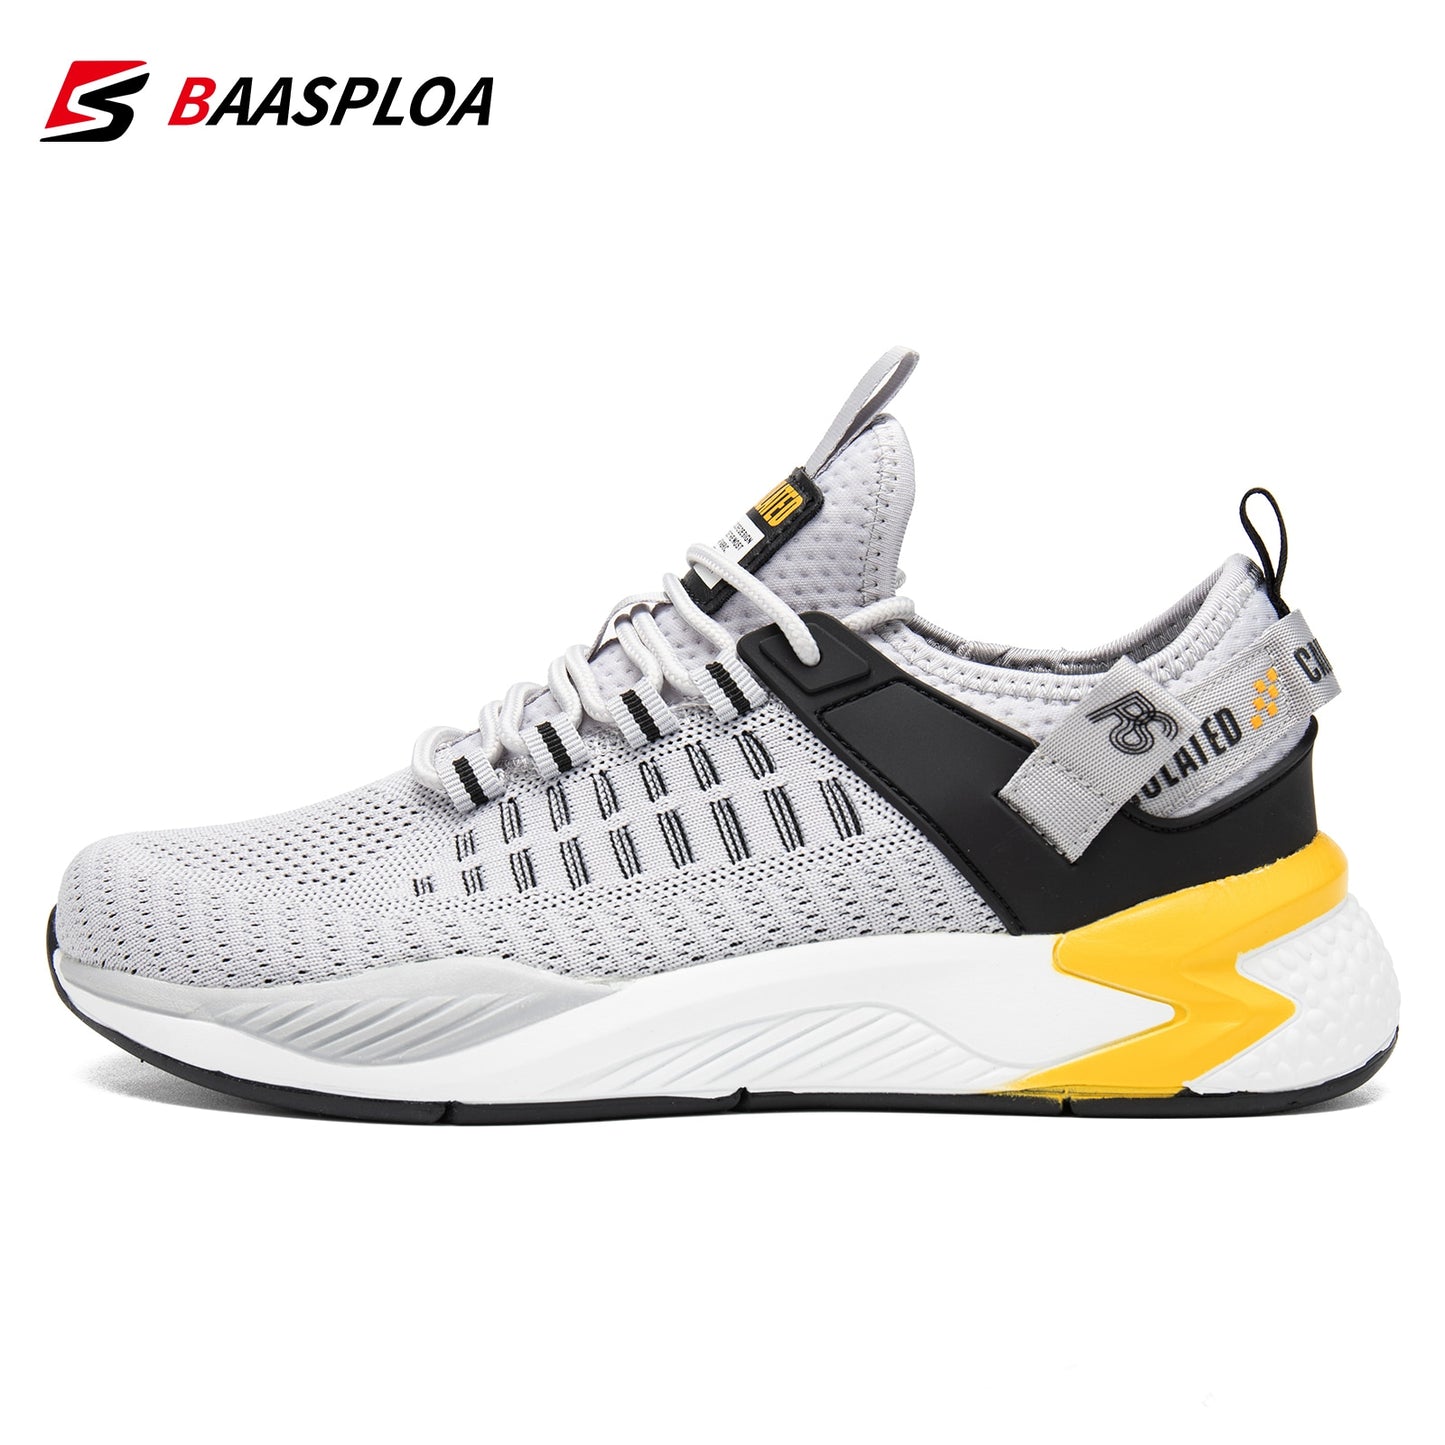 Men Running Shoes Non-slip Shock Absorption Sneaker Lightweight Tennis Shoe Breathable Casual Shoes The Clothing Company Sydney